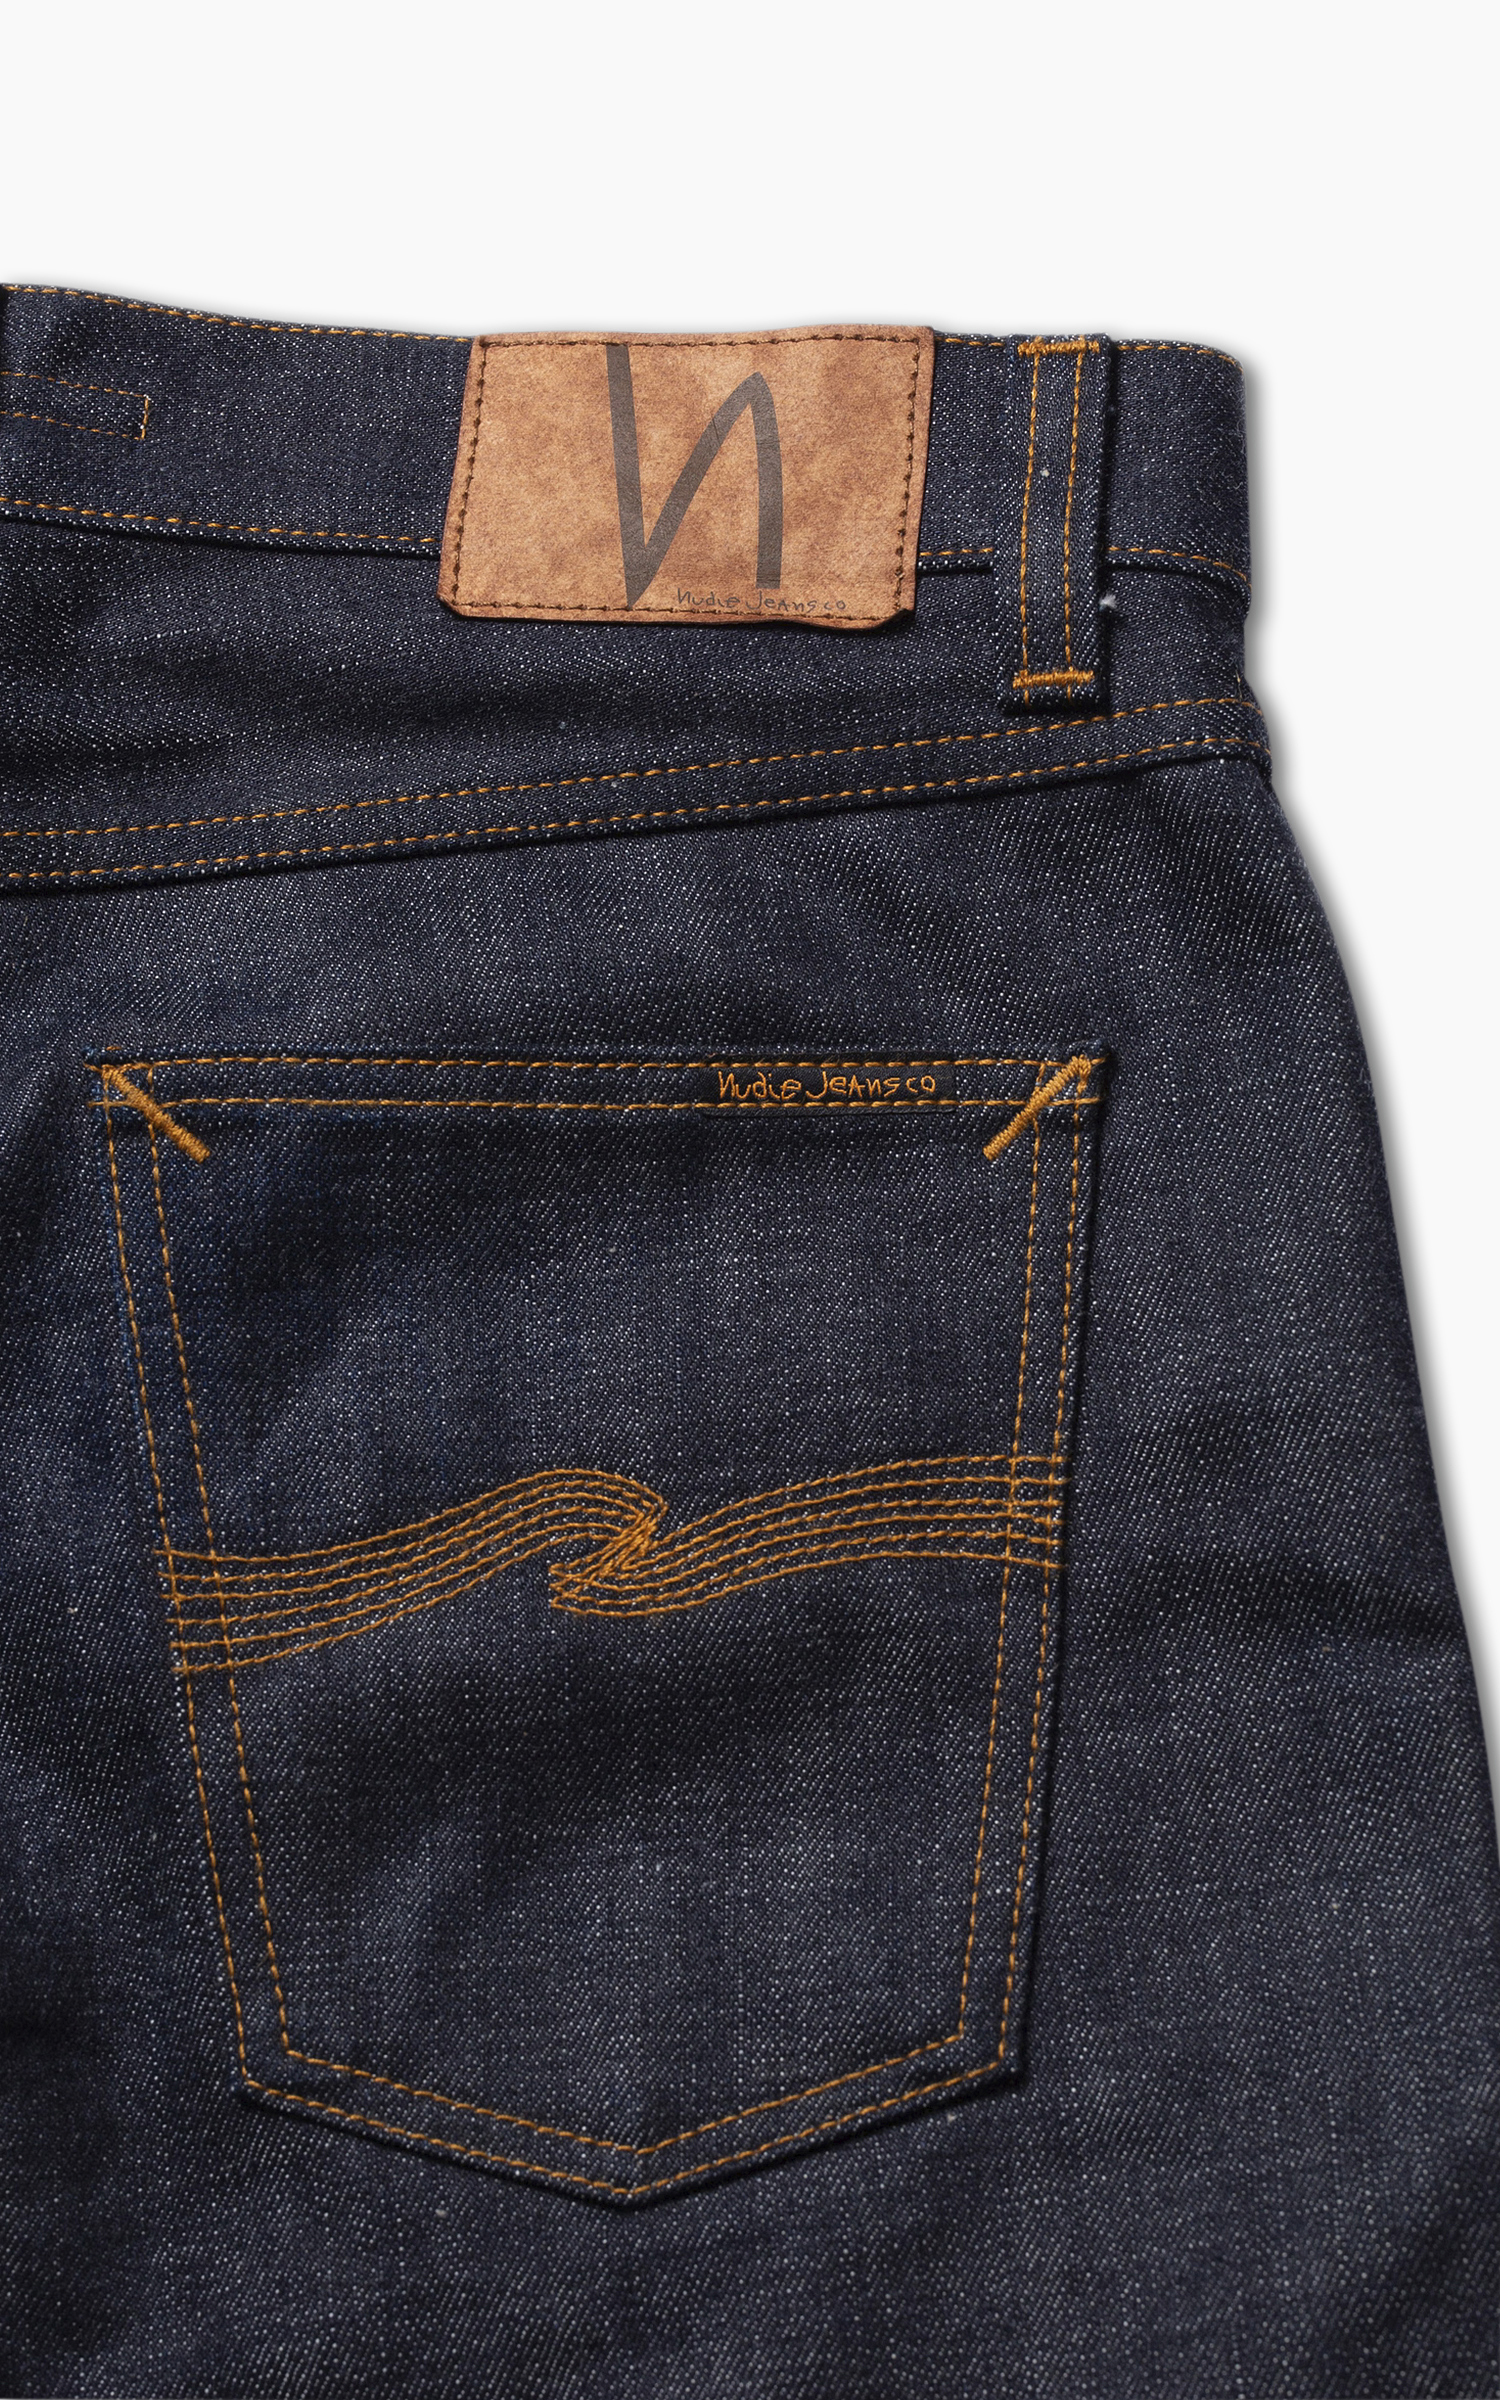 Nudie Jeans Gritty Jackson Dry Ruby Selvage | Cultizm